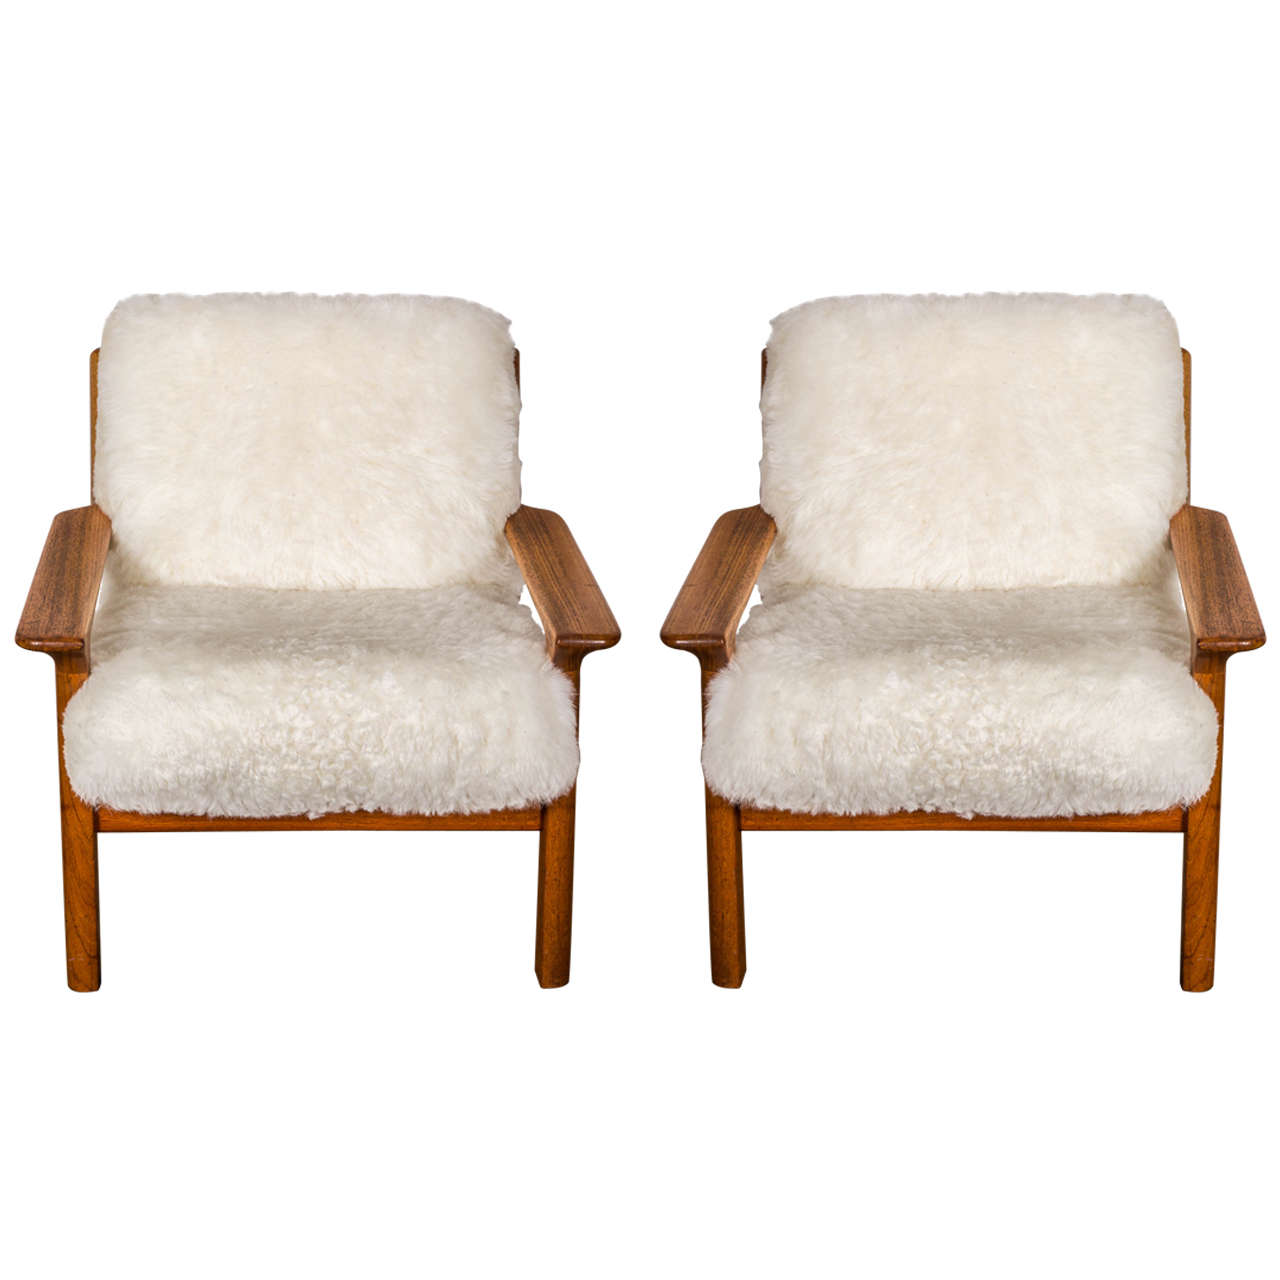 Pair of Sheepskin Covered Lounge Chairs by Glostrup